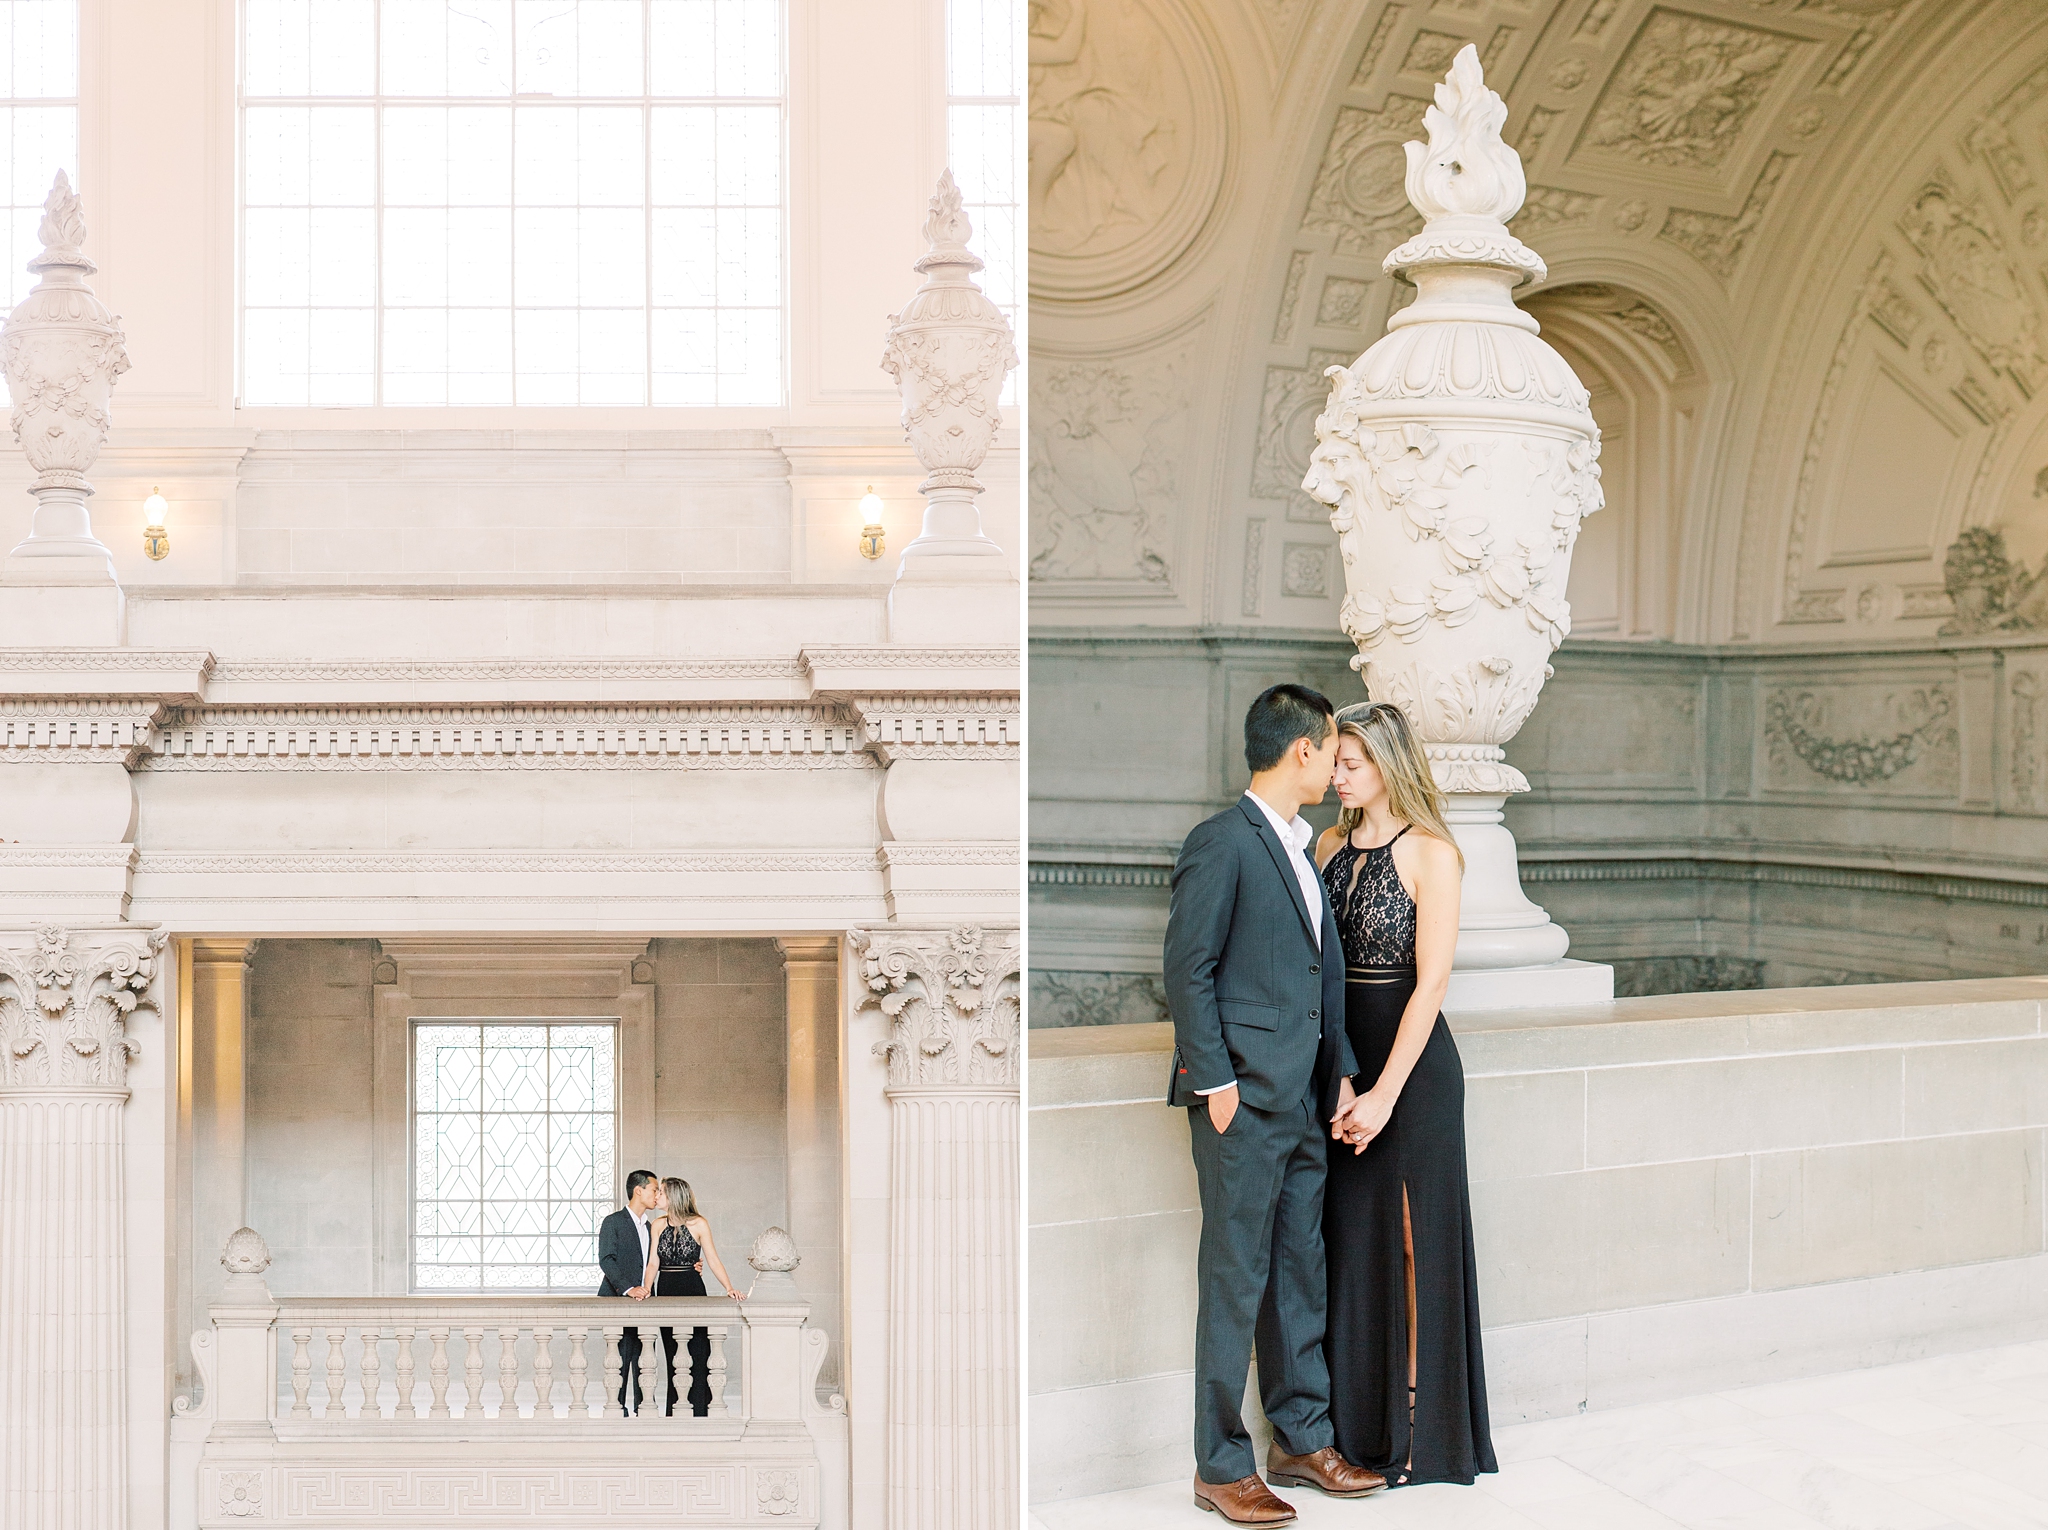 A fine art engagement session at San Francisco's iconic City Hall captured by destination wedding photographer, Alicia Lacey.